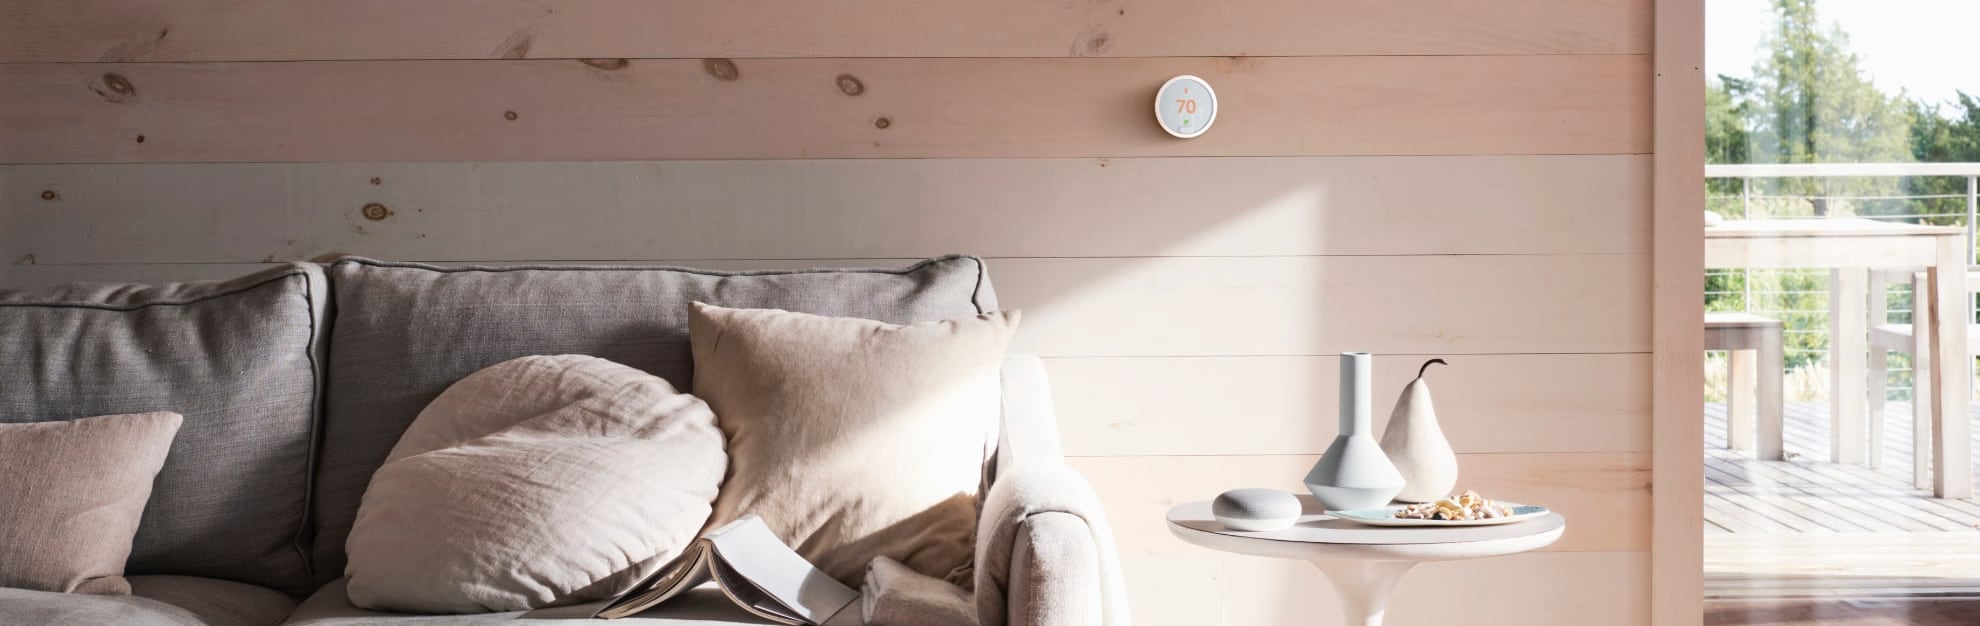 Vivint Home Automation in Fort Collins